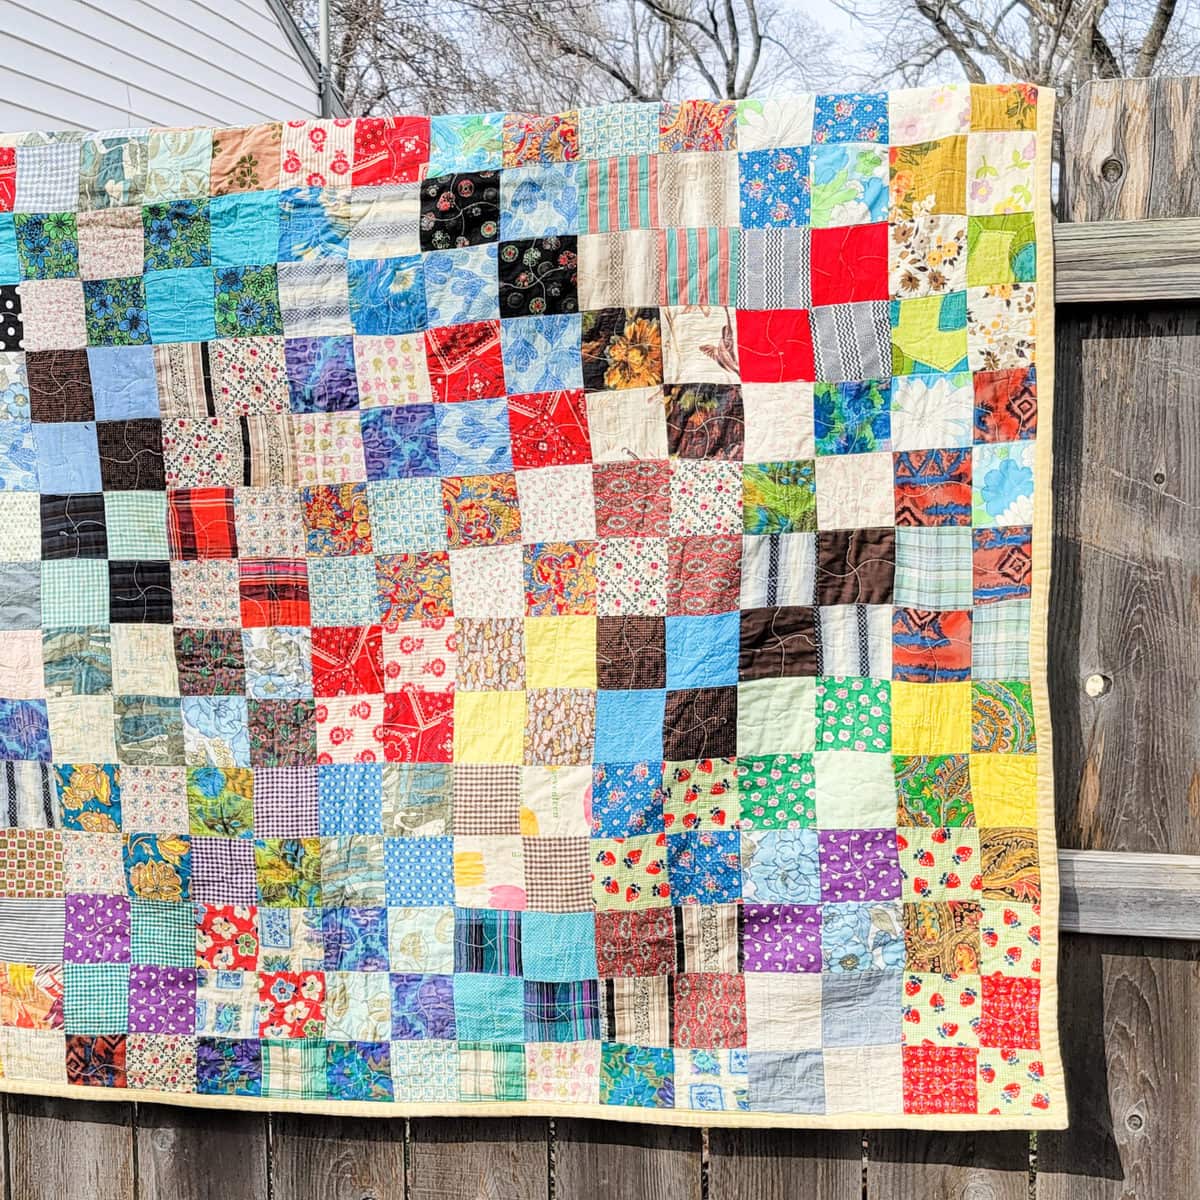 Sondra Davison of Out of the Blue Quilts Close-up of one of Sondra’s ...